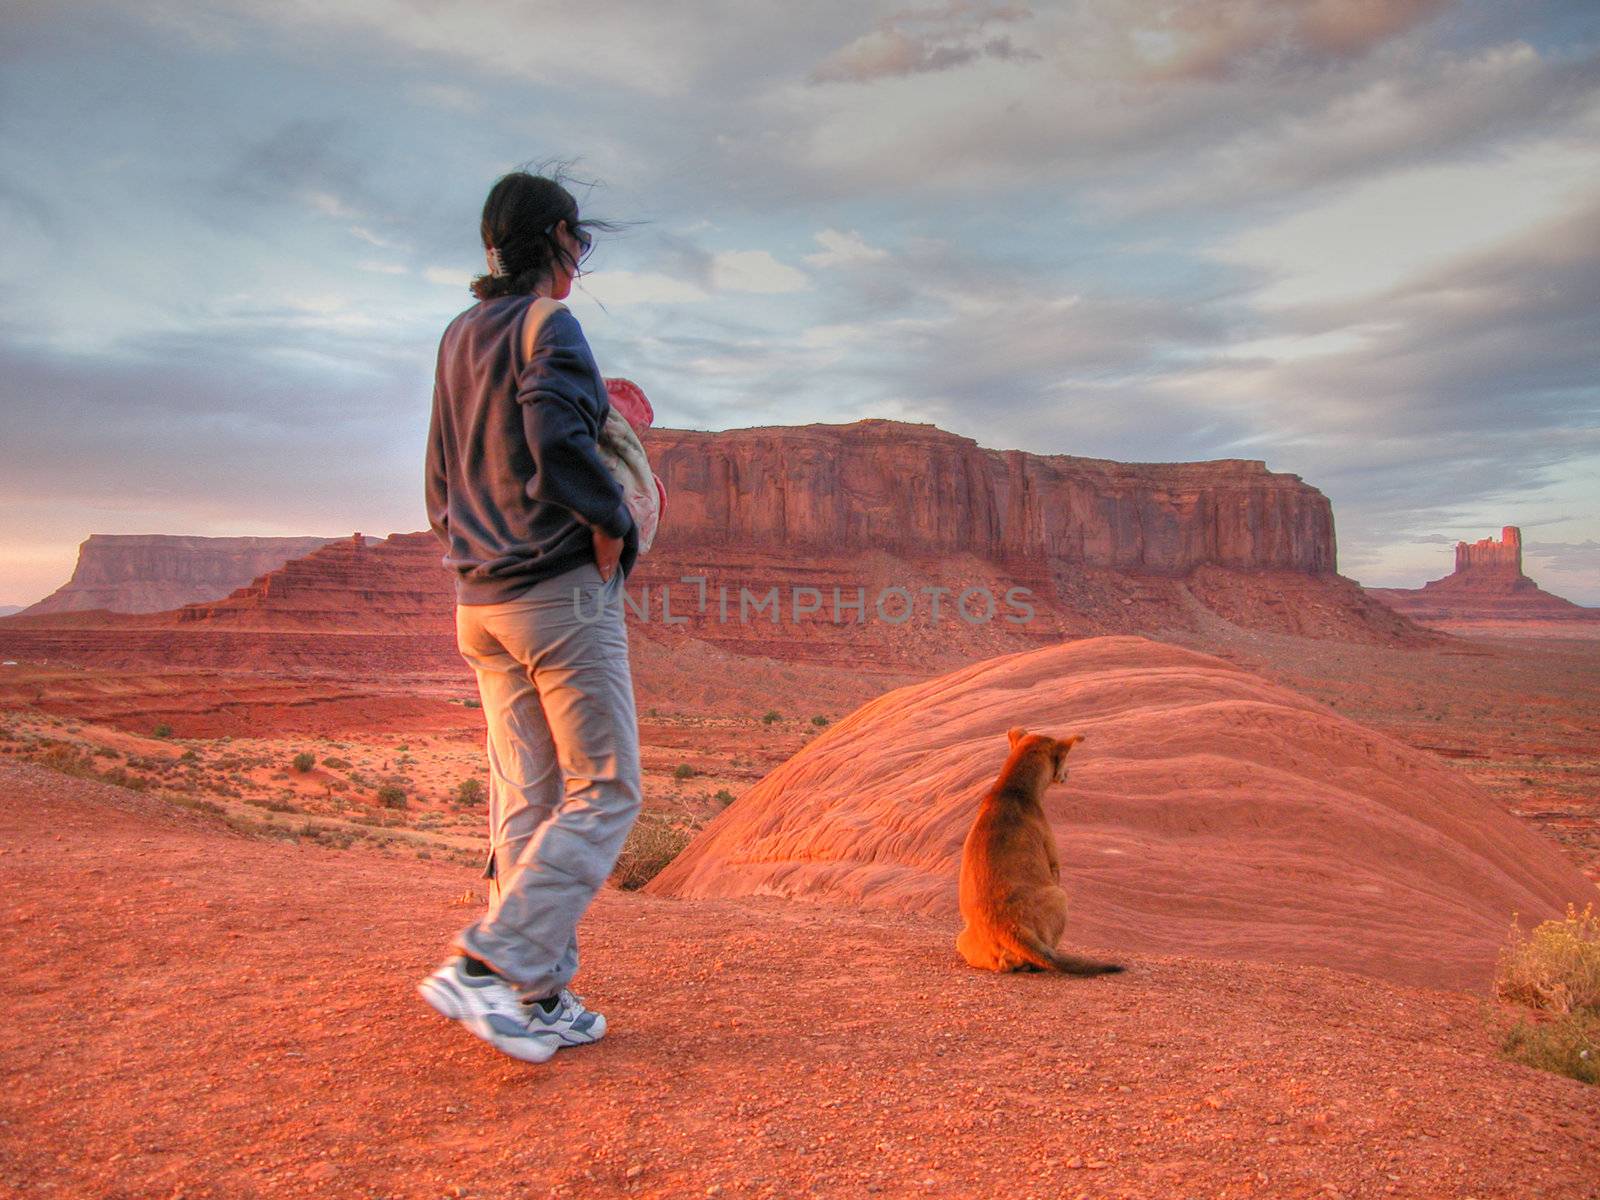 Staring at Monument Valley, 2004 by jovannig